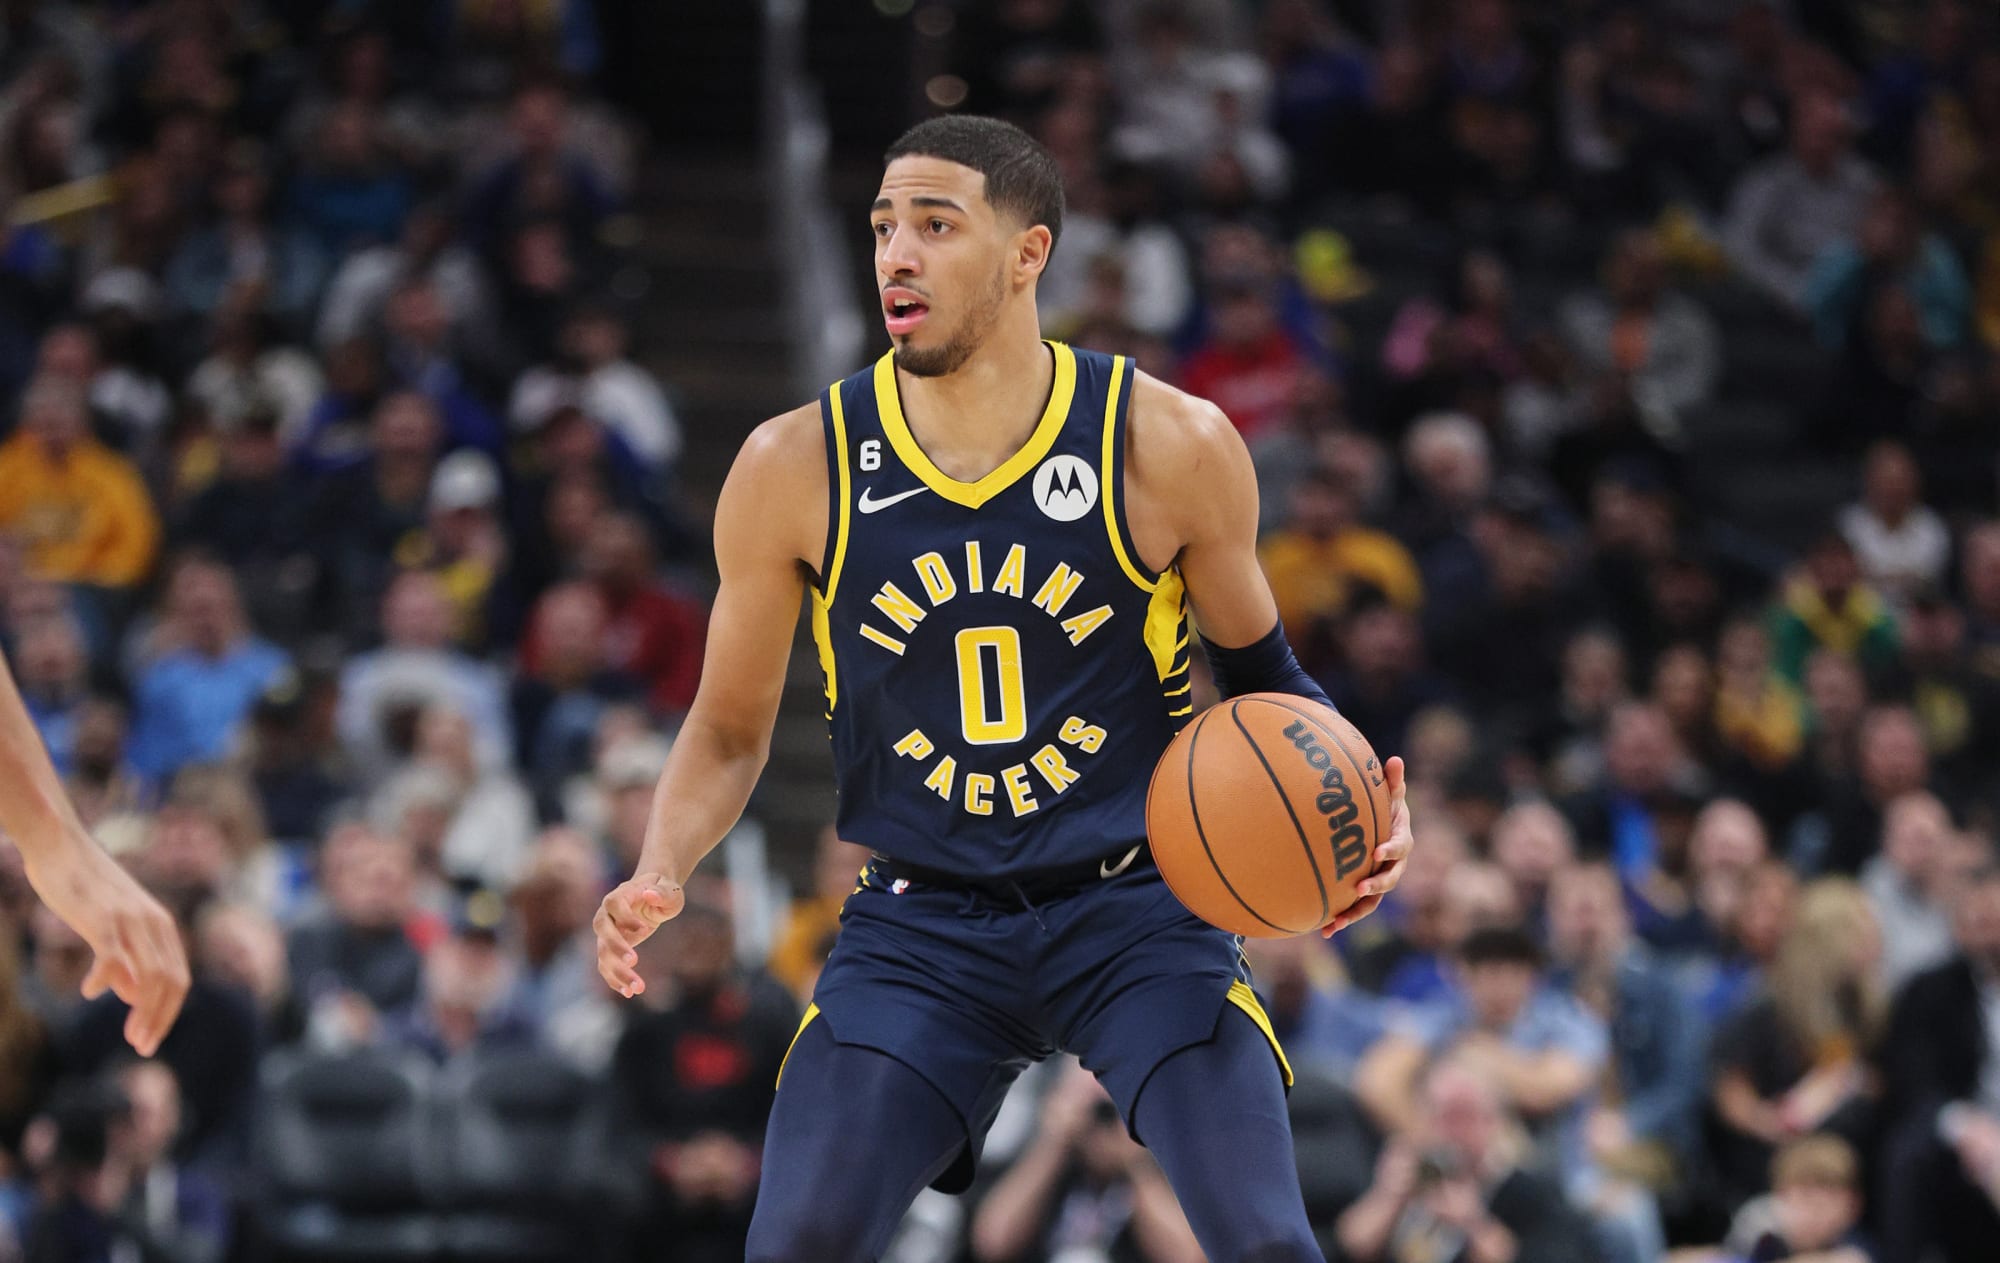 New trade rumors between Indiana Pacers and Los Angeles Lakers